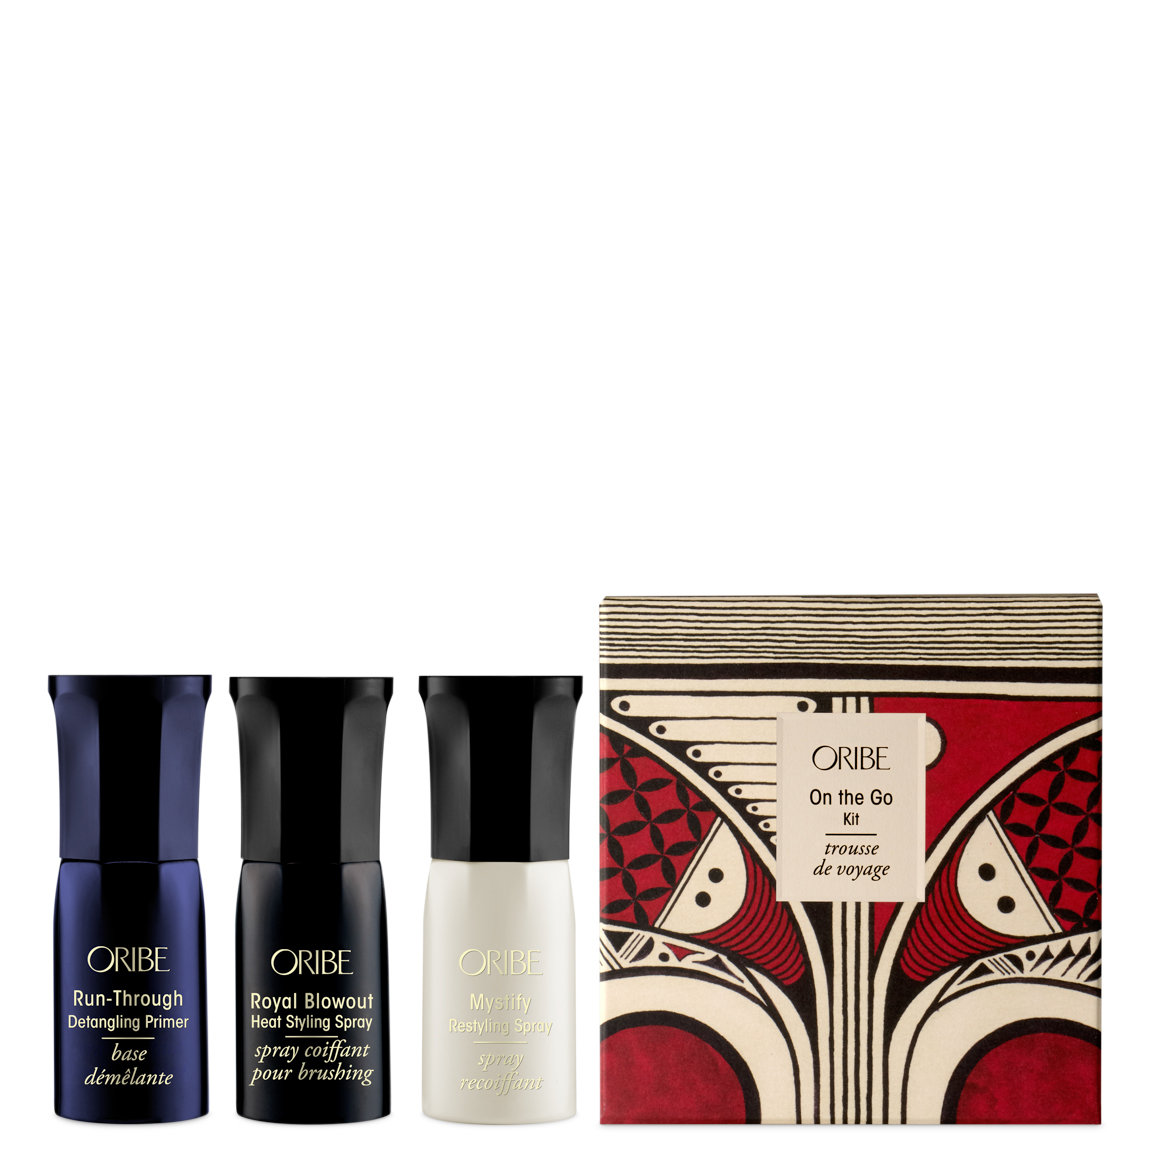 Free 3-piece On the Go Kit with qualifying Oribe purchase